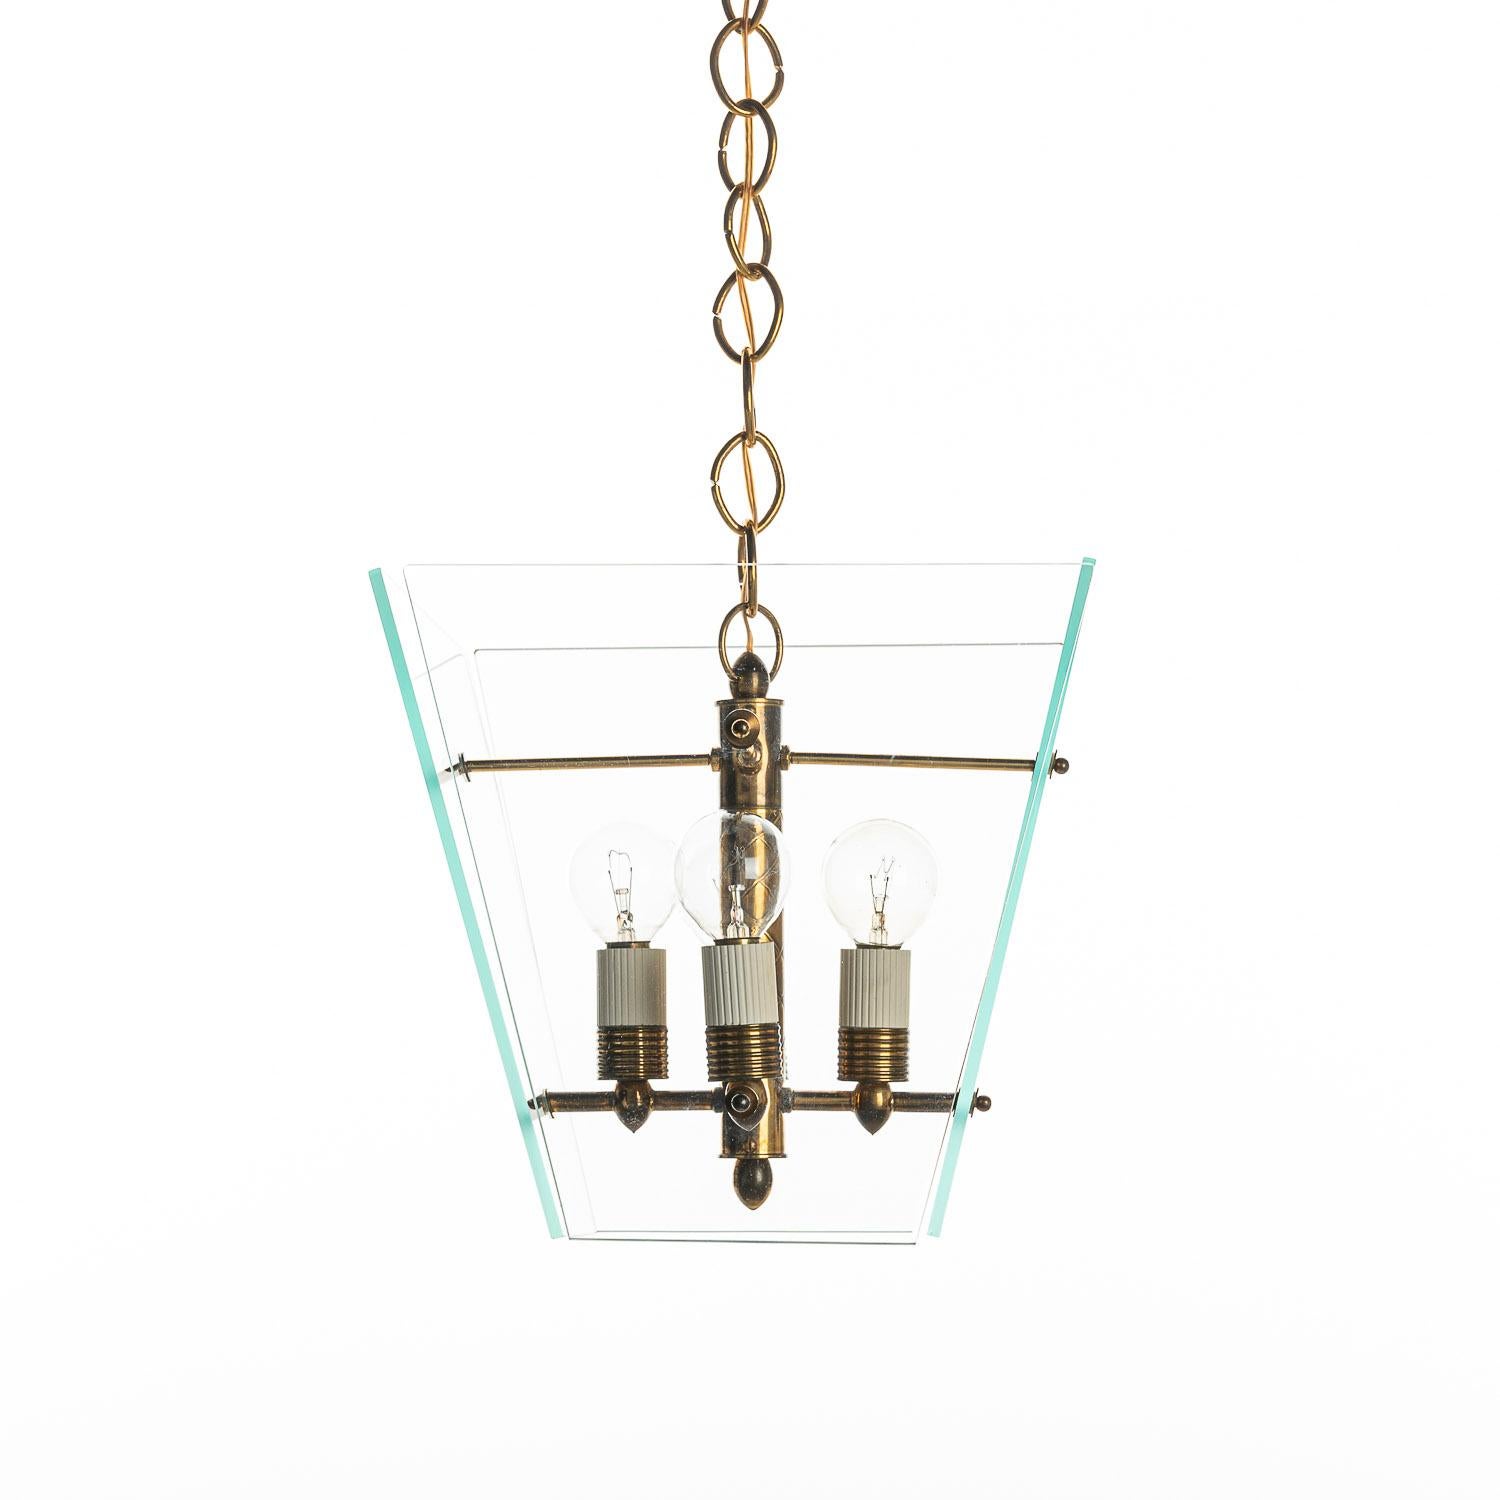 Delicate 1950s lantern. Consists of four thin glass panels, a brass frame and four E14 lightbulbs.